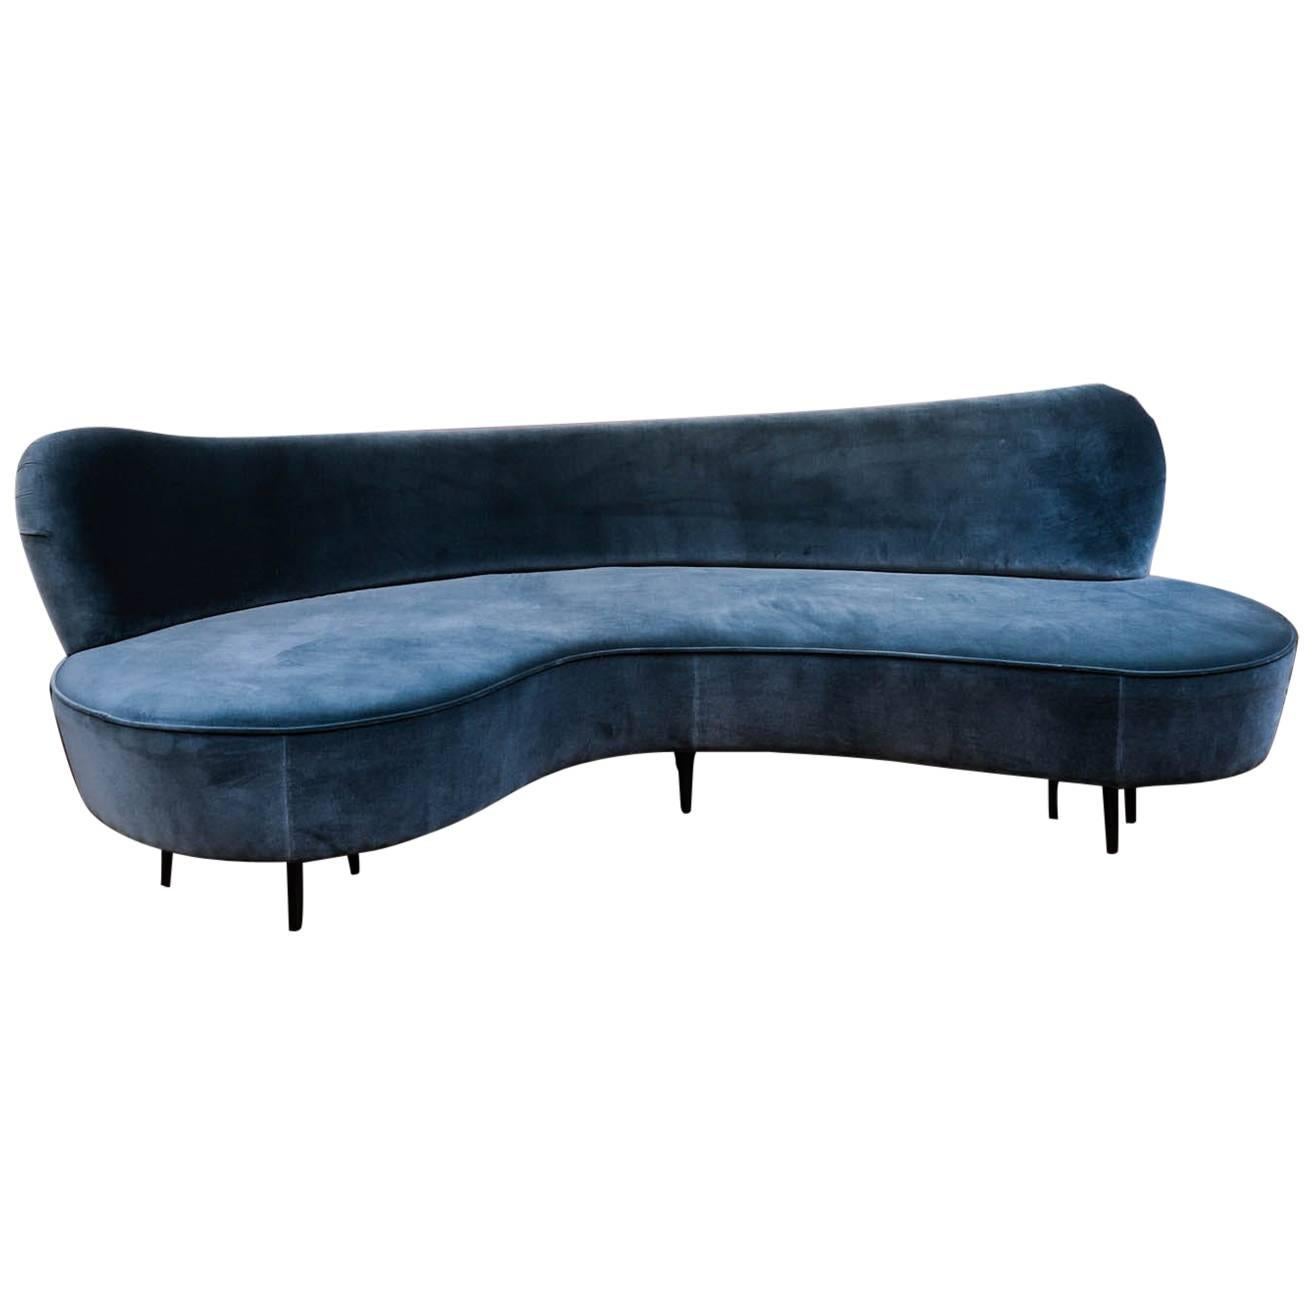 Curved Vintage Sofa at cost price